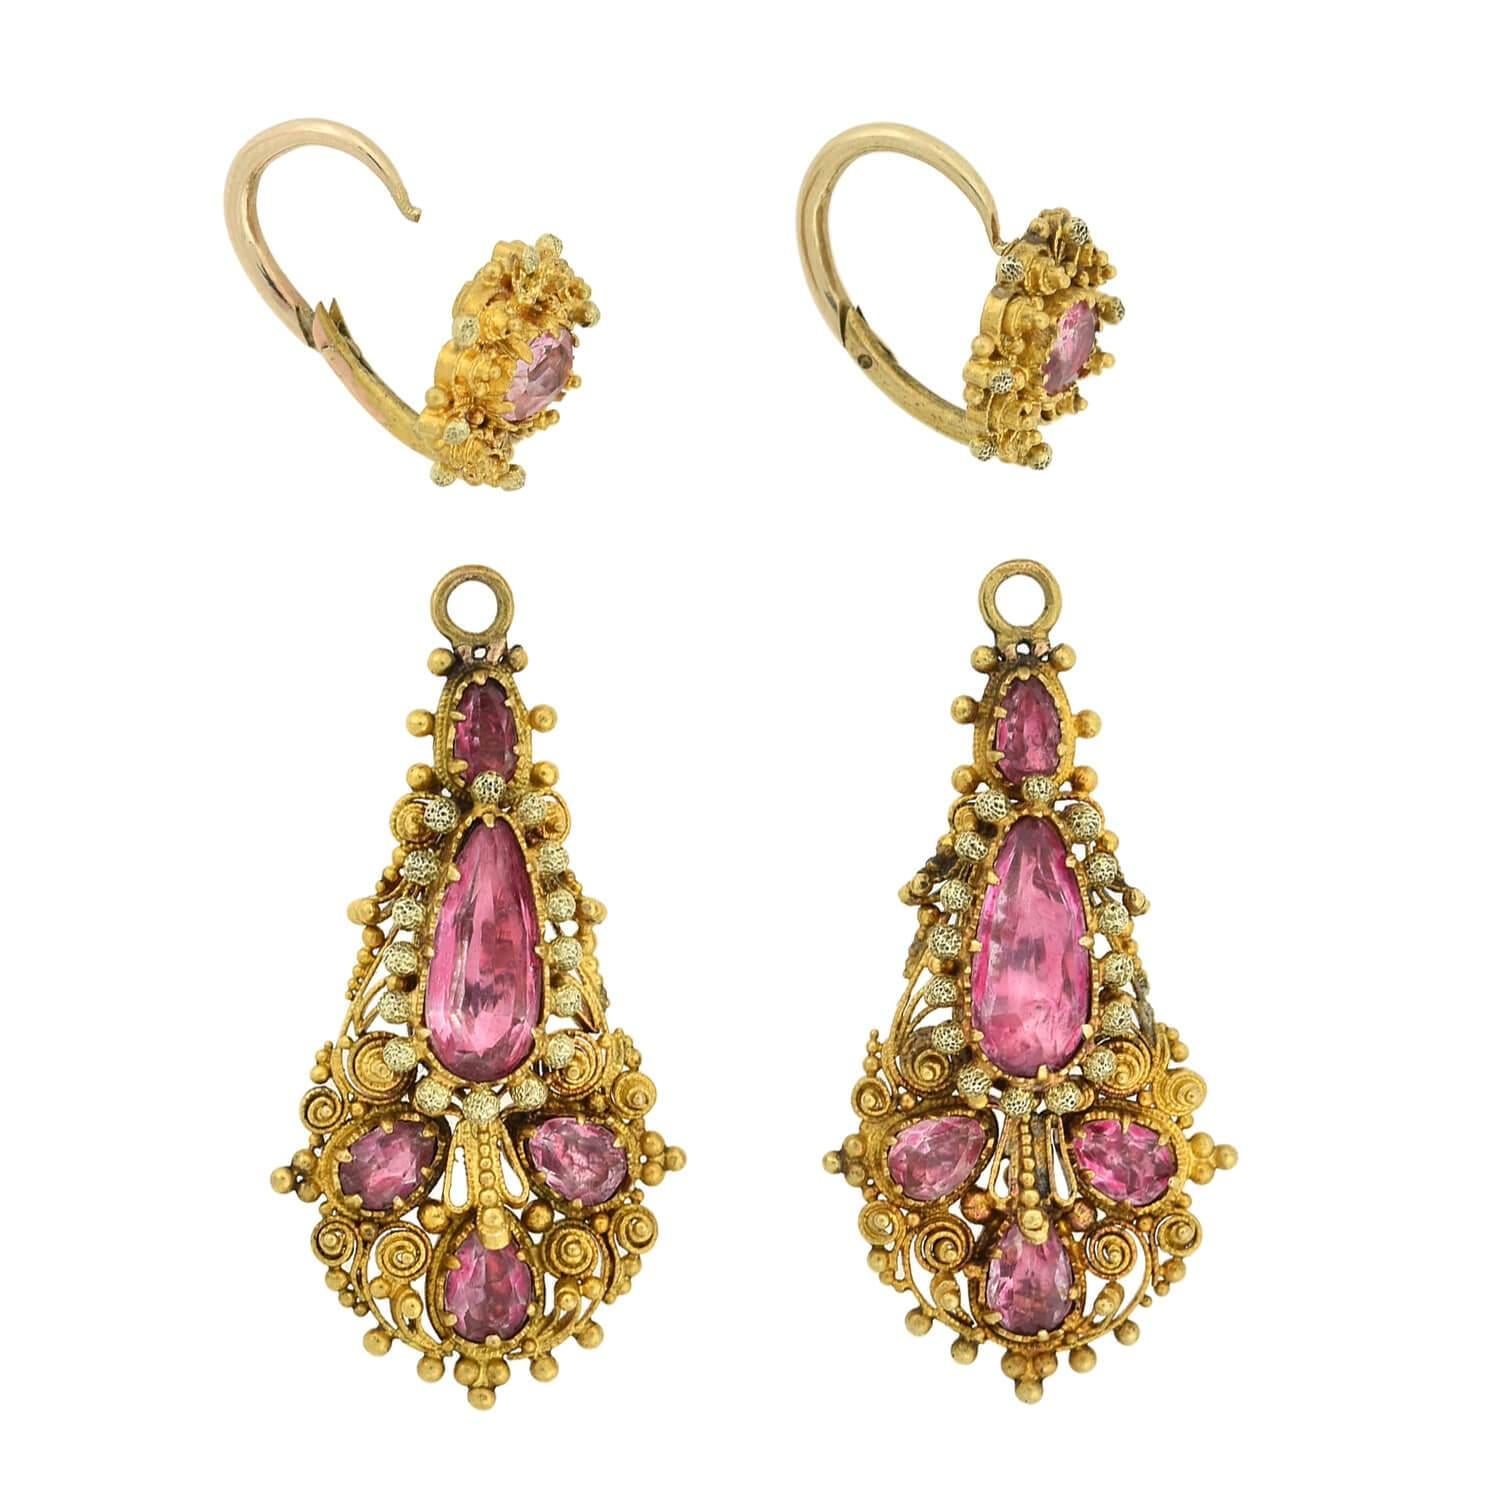 Early Georgian Pink Topaz Necklace and Earring Demi-Parure Set For Sale 2